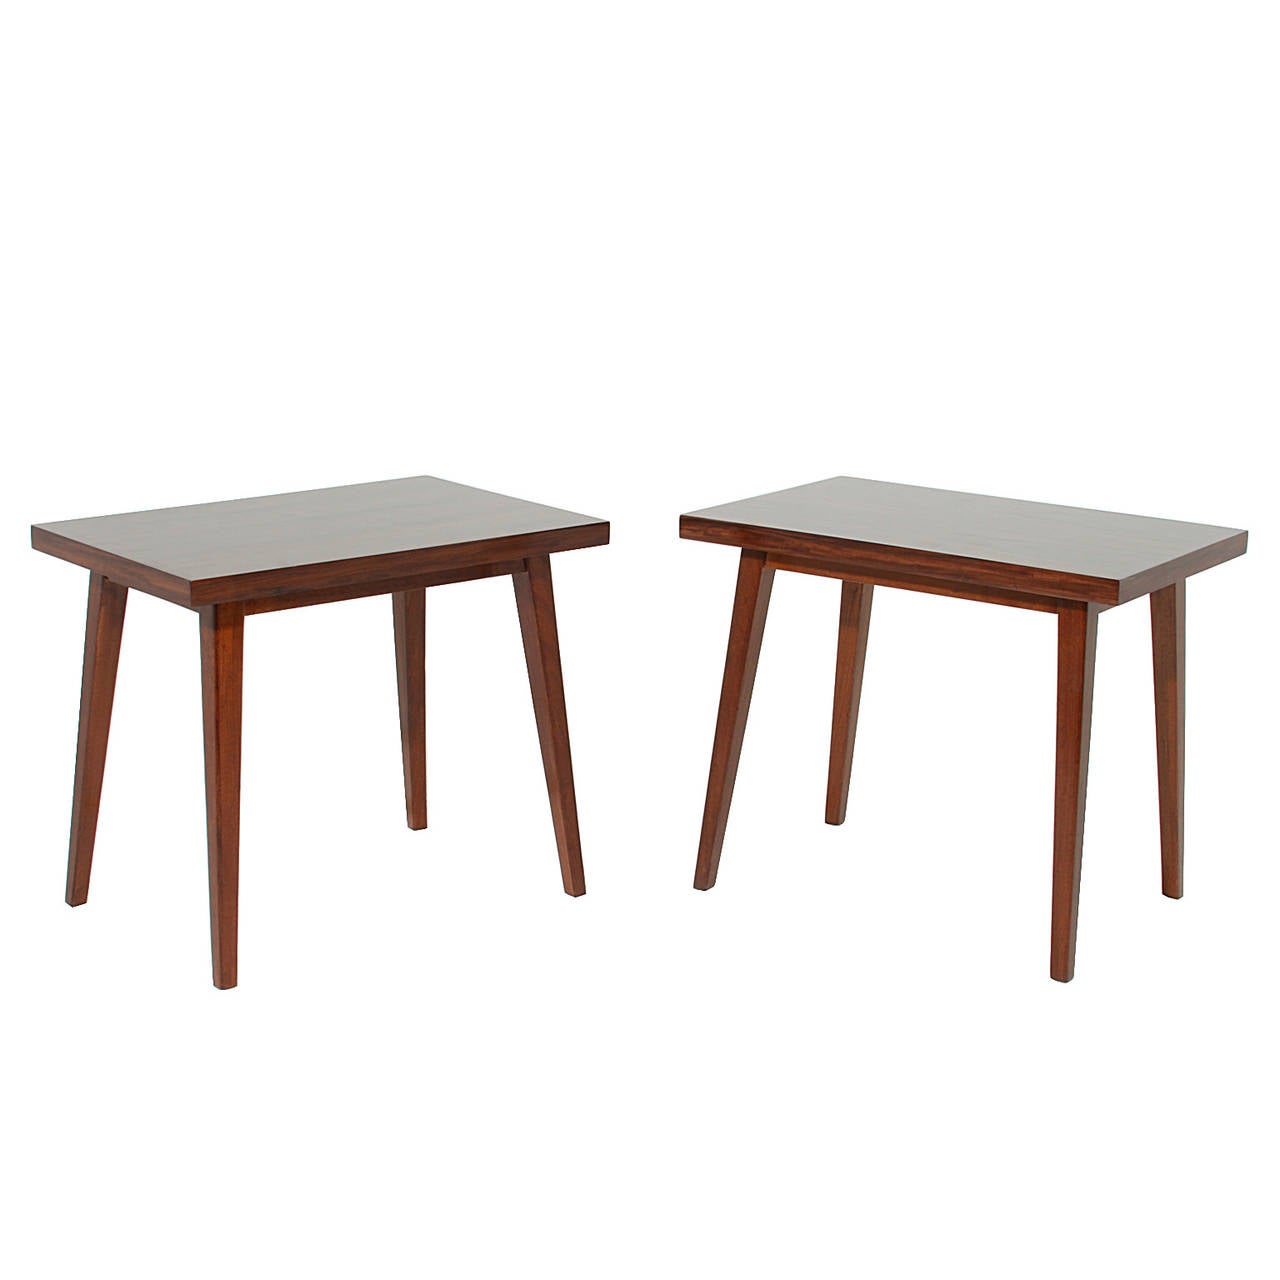 A pair of Brazilian exotic hardwood side tables with legs that pitch slightly inward.

 